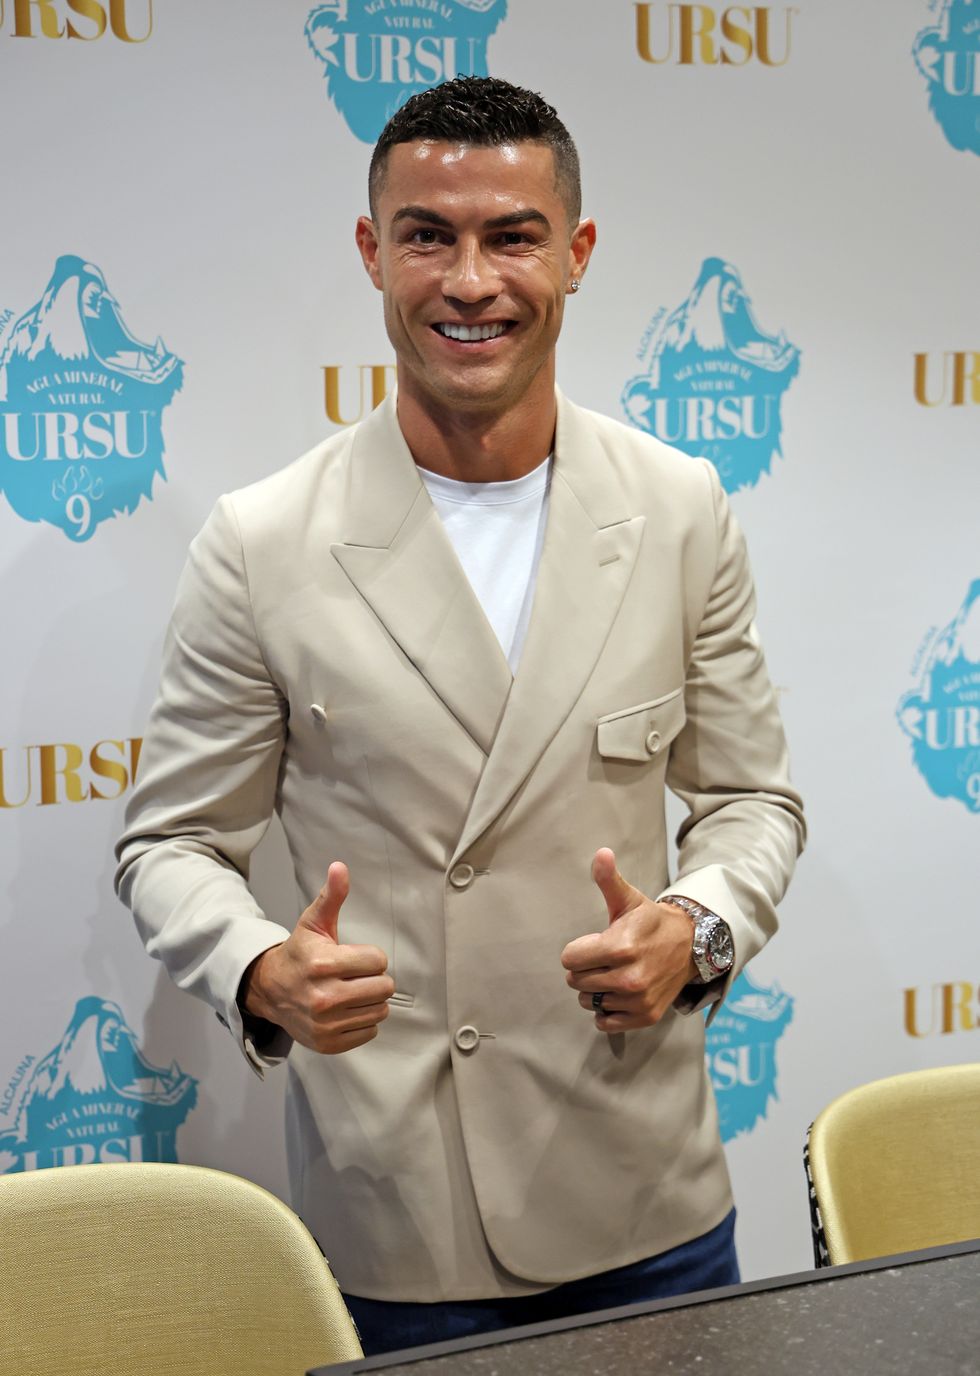 madrid, spain june 07 cristiano ronaldo and aguas minerales de avila present ursu, a natural alkaline mineral water and antioxidant, on june 7, 2023, in madrid, spain photo by raul terreleuropa press via getty images